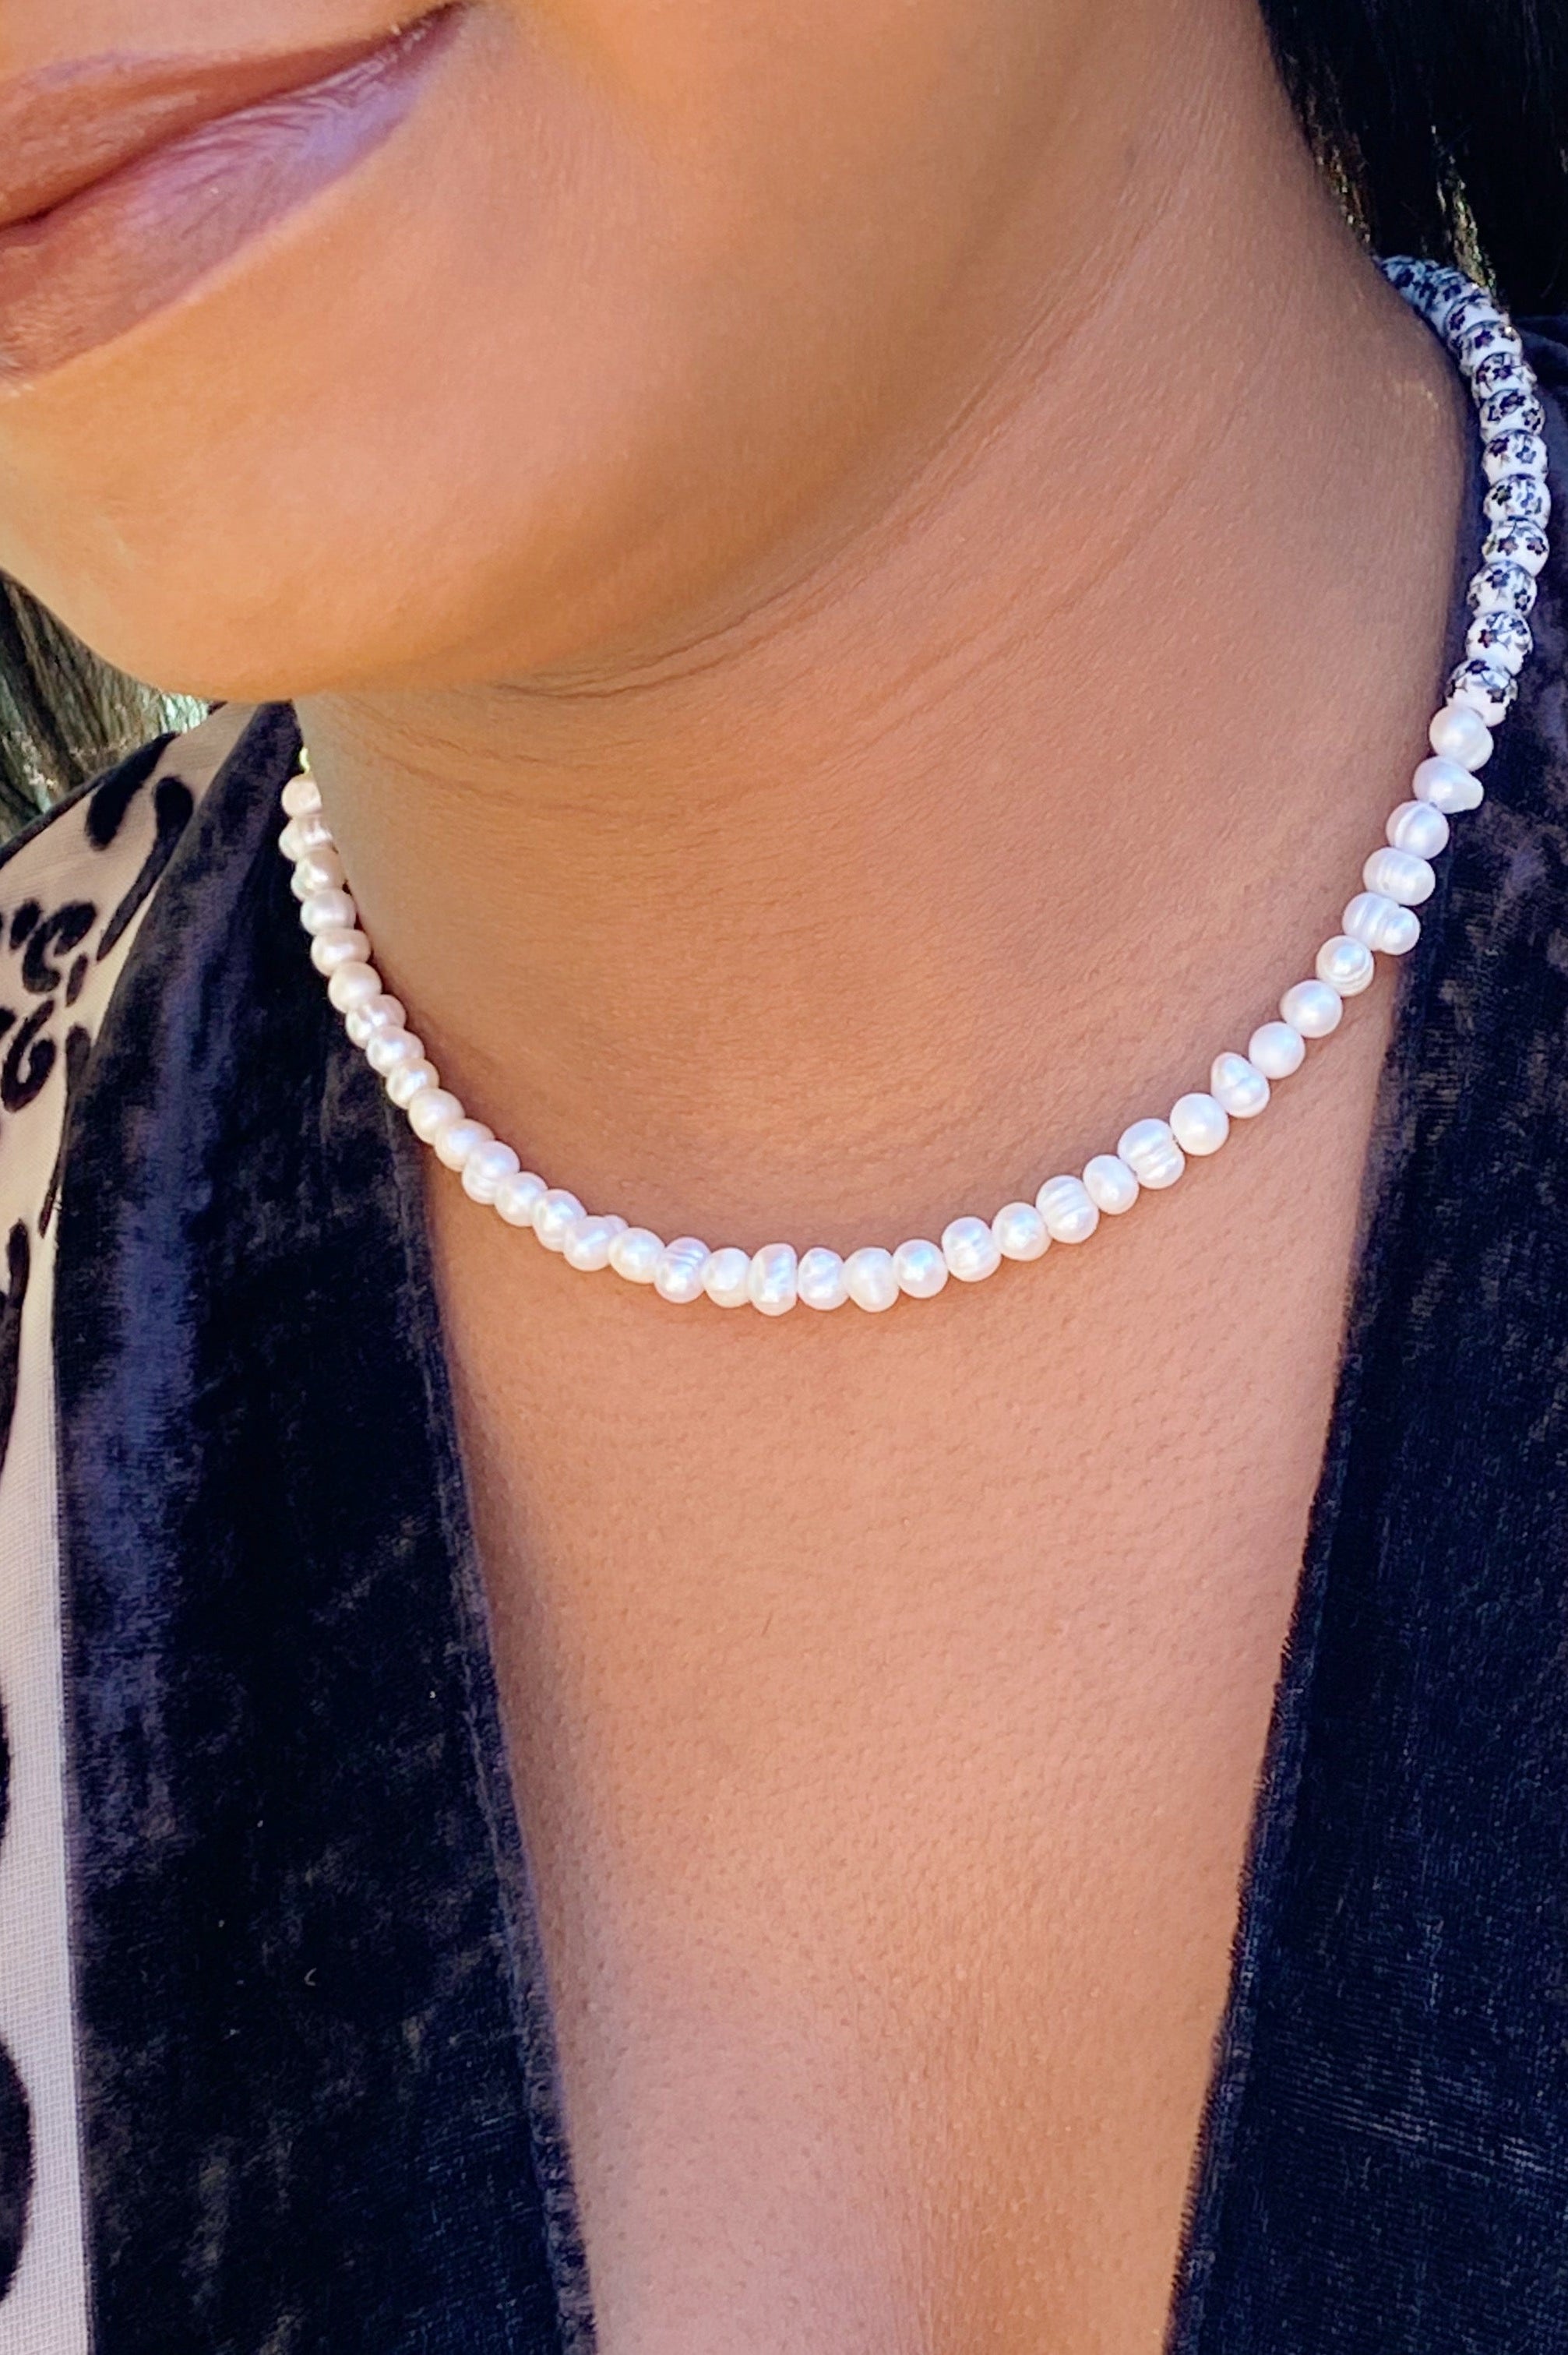 So Fresh Pearl And Porcelain Choker Necklace Ellisonyoung.com